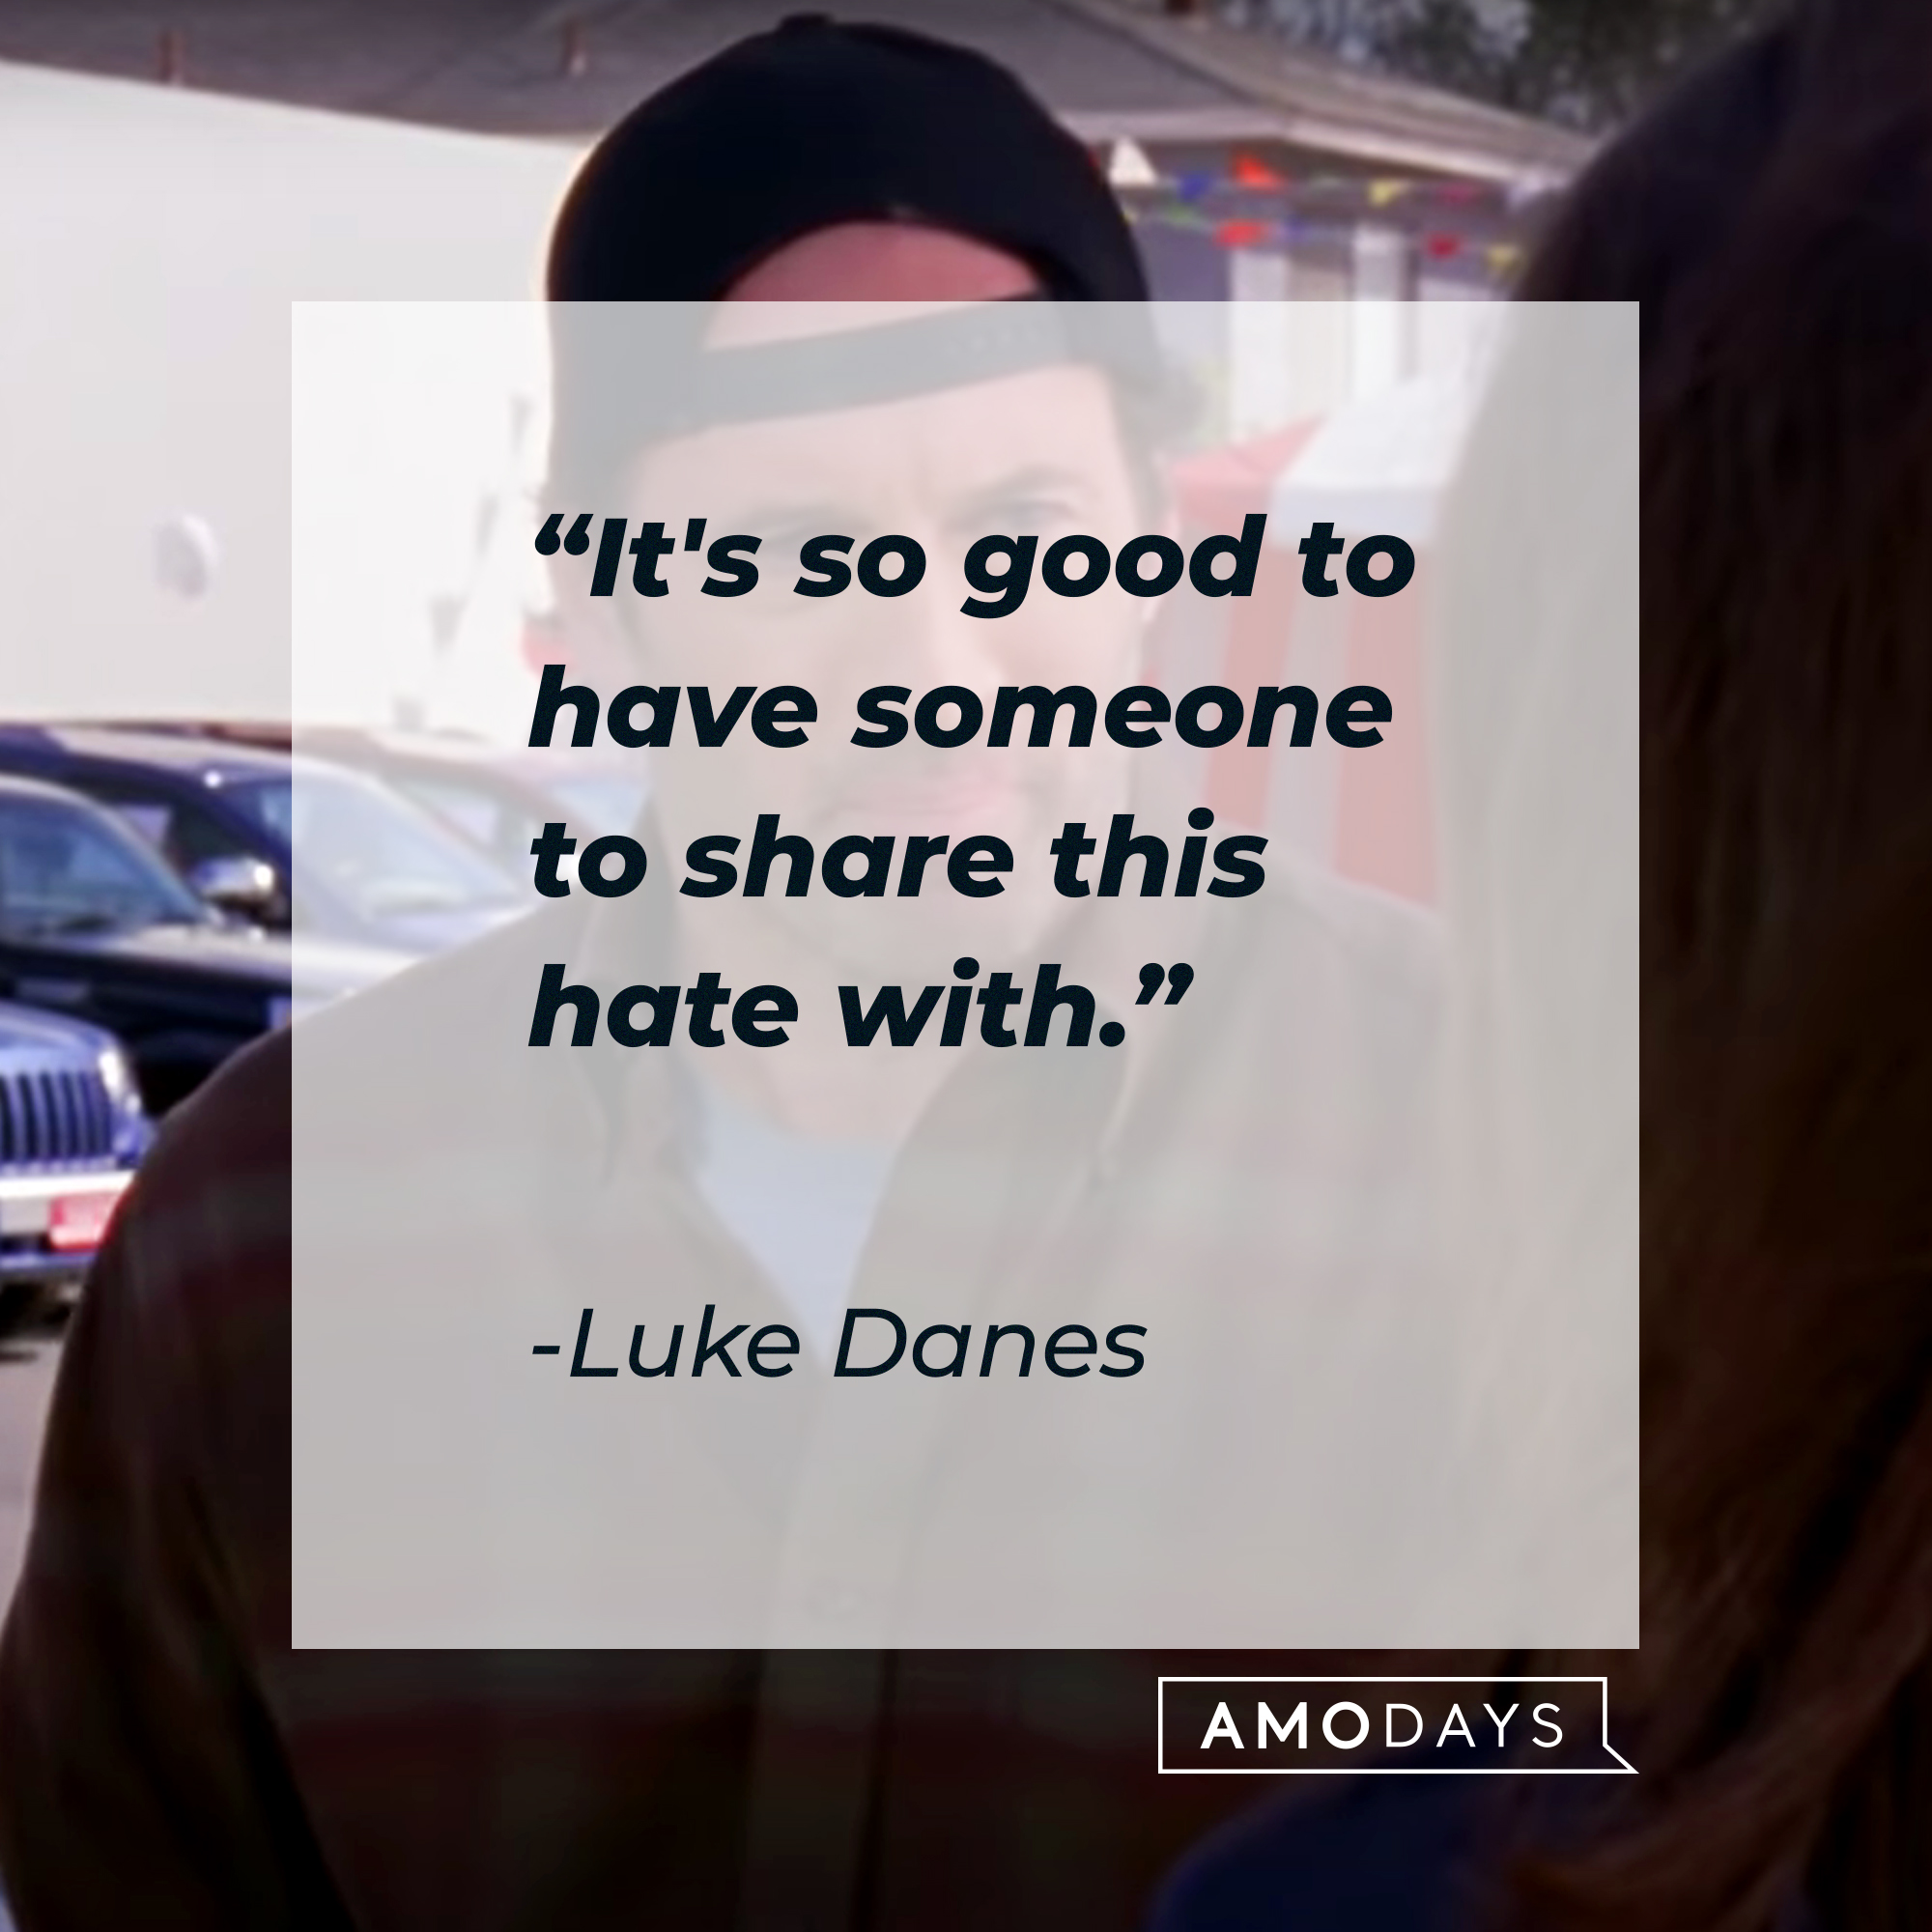 Luke Danes, with his quote: “It's so good to have someone to share this hate with.” |Source: facebook.com/GilmoreGirls